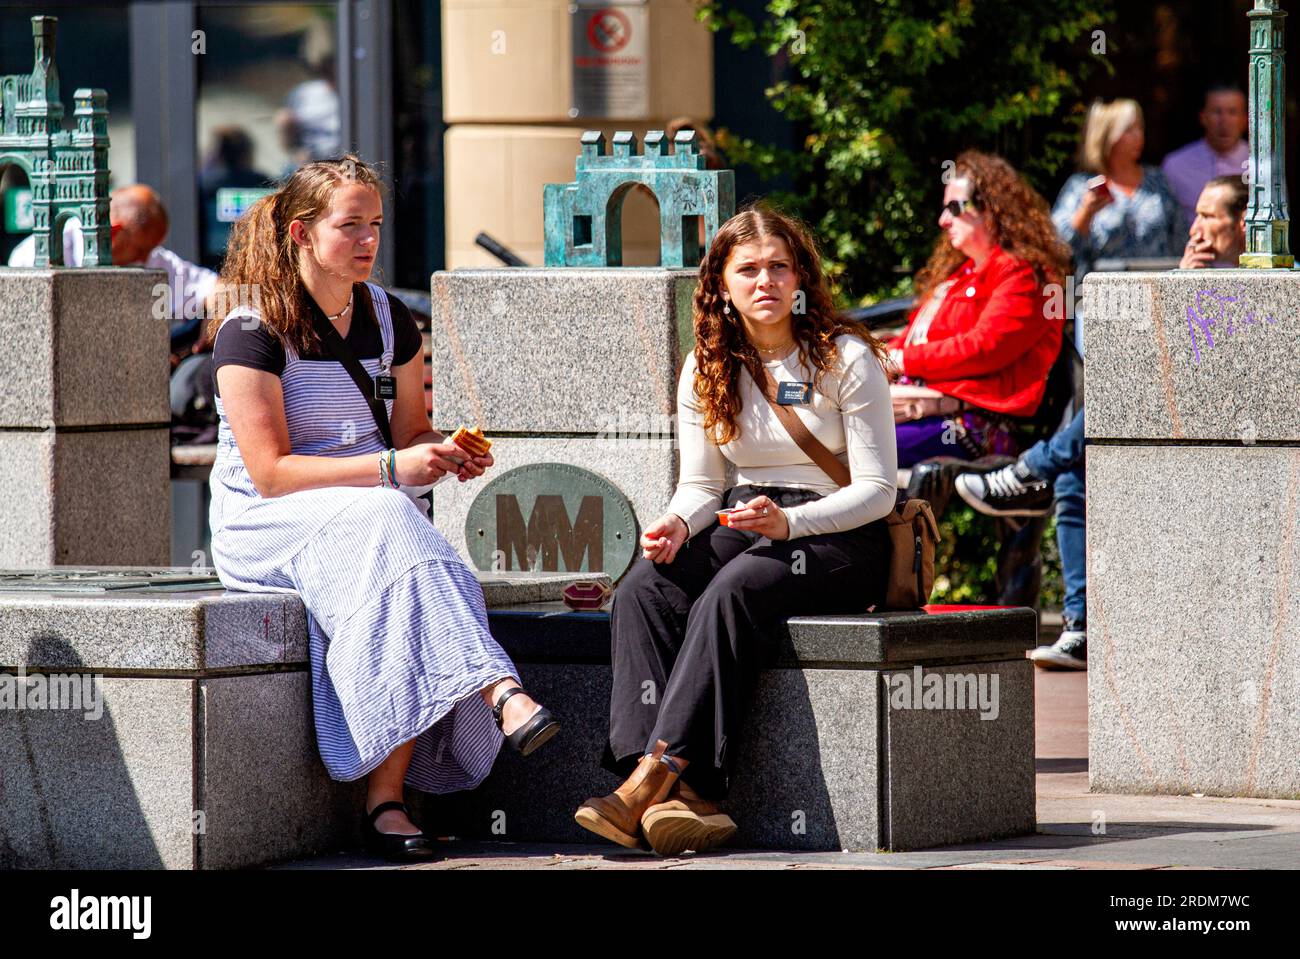 Dundee, Tayside, Scotland, UK. 22nd July, 2023. UK Weather: The weather in Tayside, Scotland is sunny and warm with temperatures reaching 22°C. Stylish ladies spend the weekend in Dundee's city centre, taking advantage of the glorious warm July morning sunshine while enjoying town life and shopping for summer sales. Credit: Dundee Photographics/Alamy Live News Stock Photo